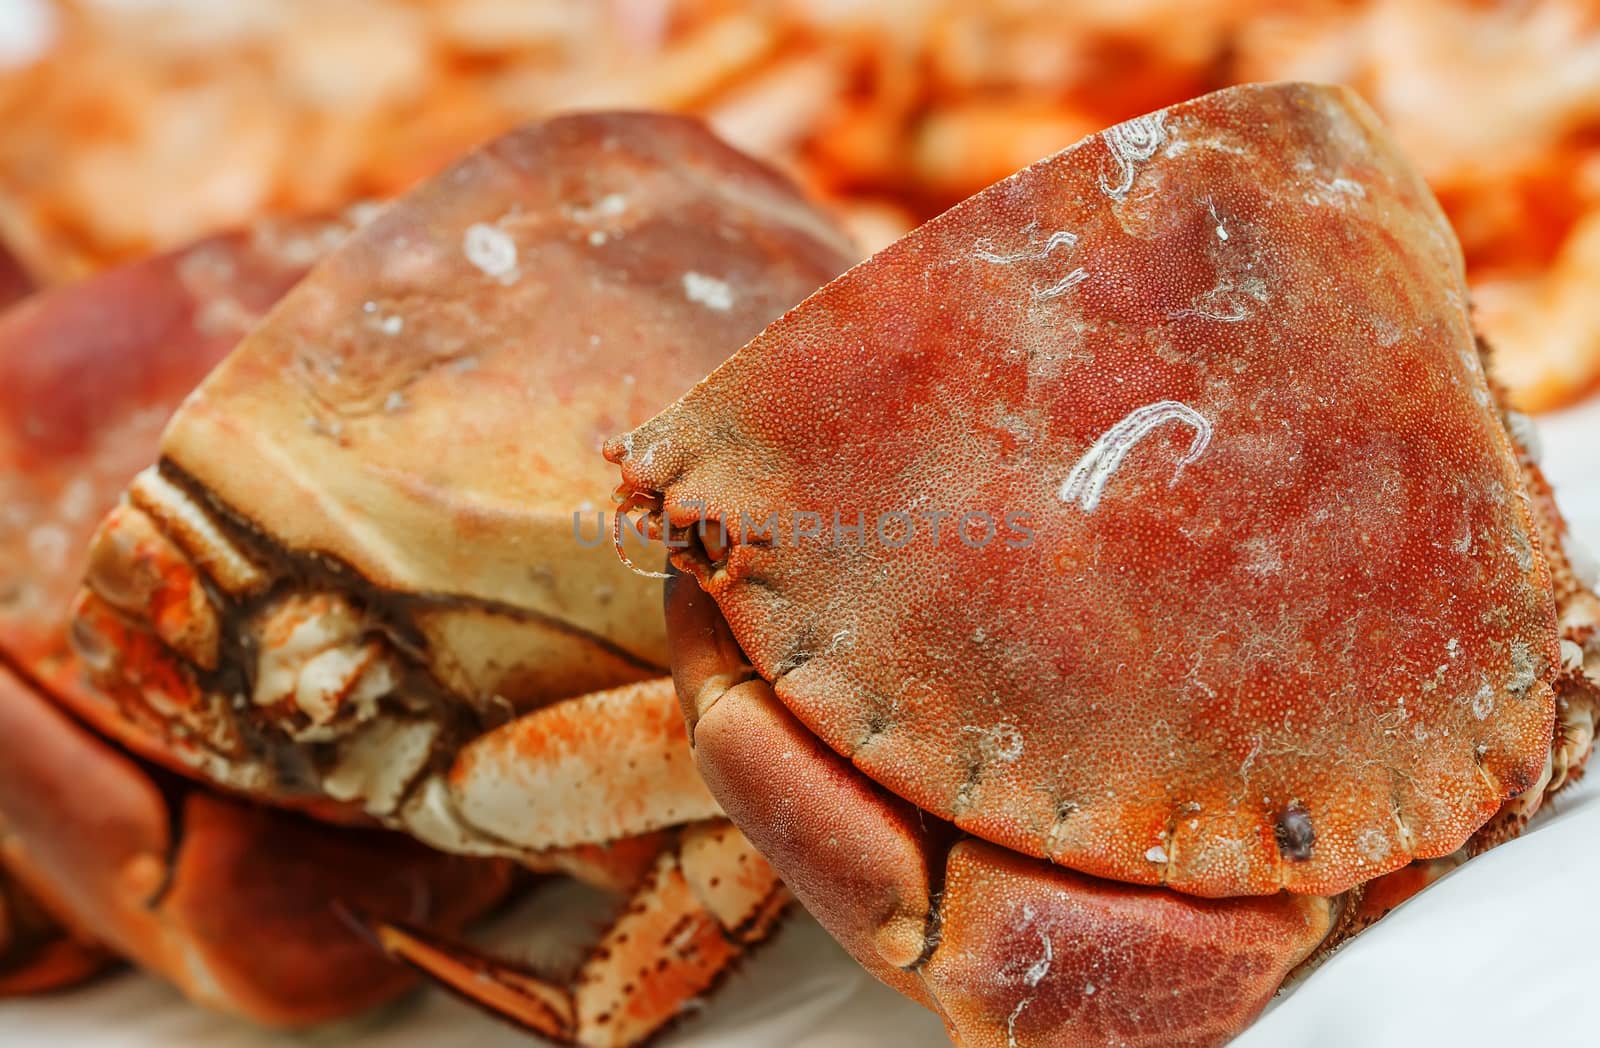 half of fresh crab on ice for sale in a fish market by pixinoo